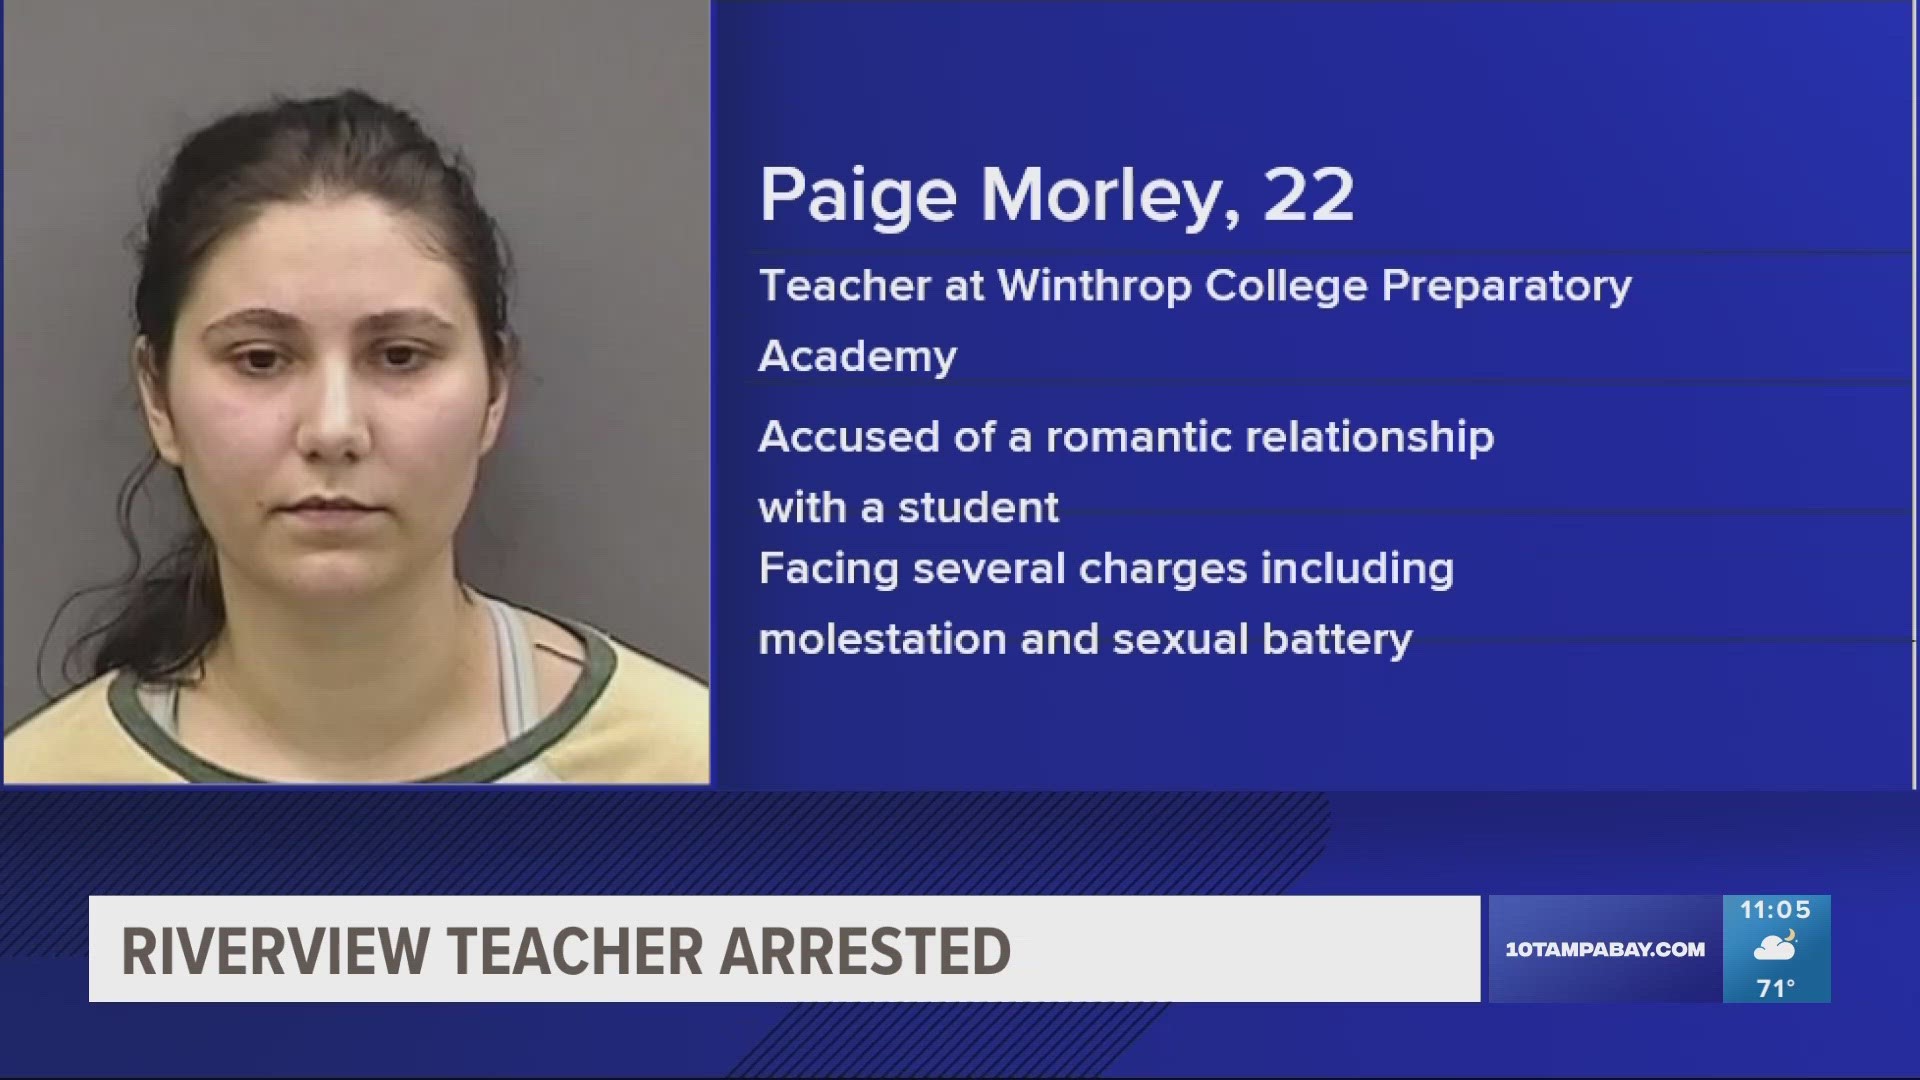 Paige Morley, 22, was a teacher at Winthrop College Preparatory Academy.